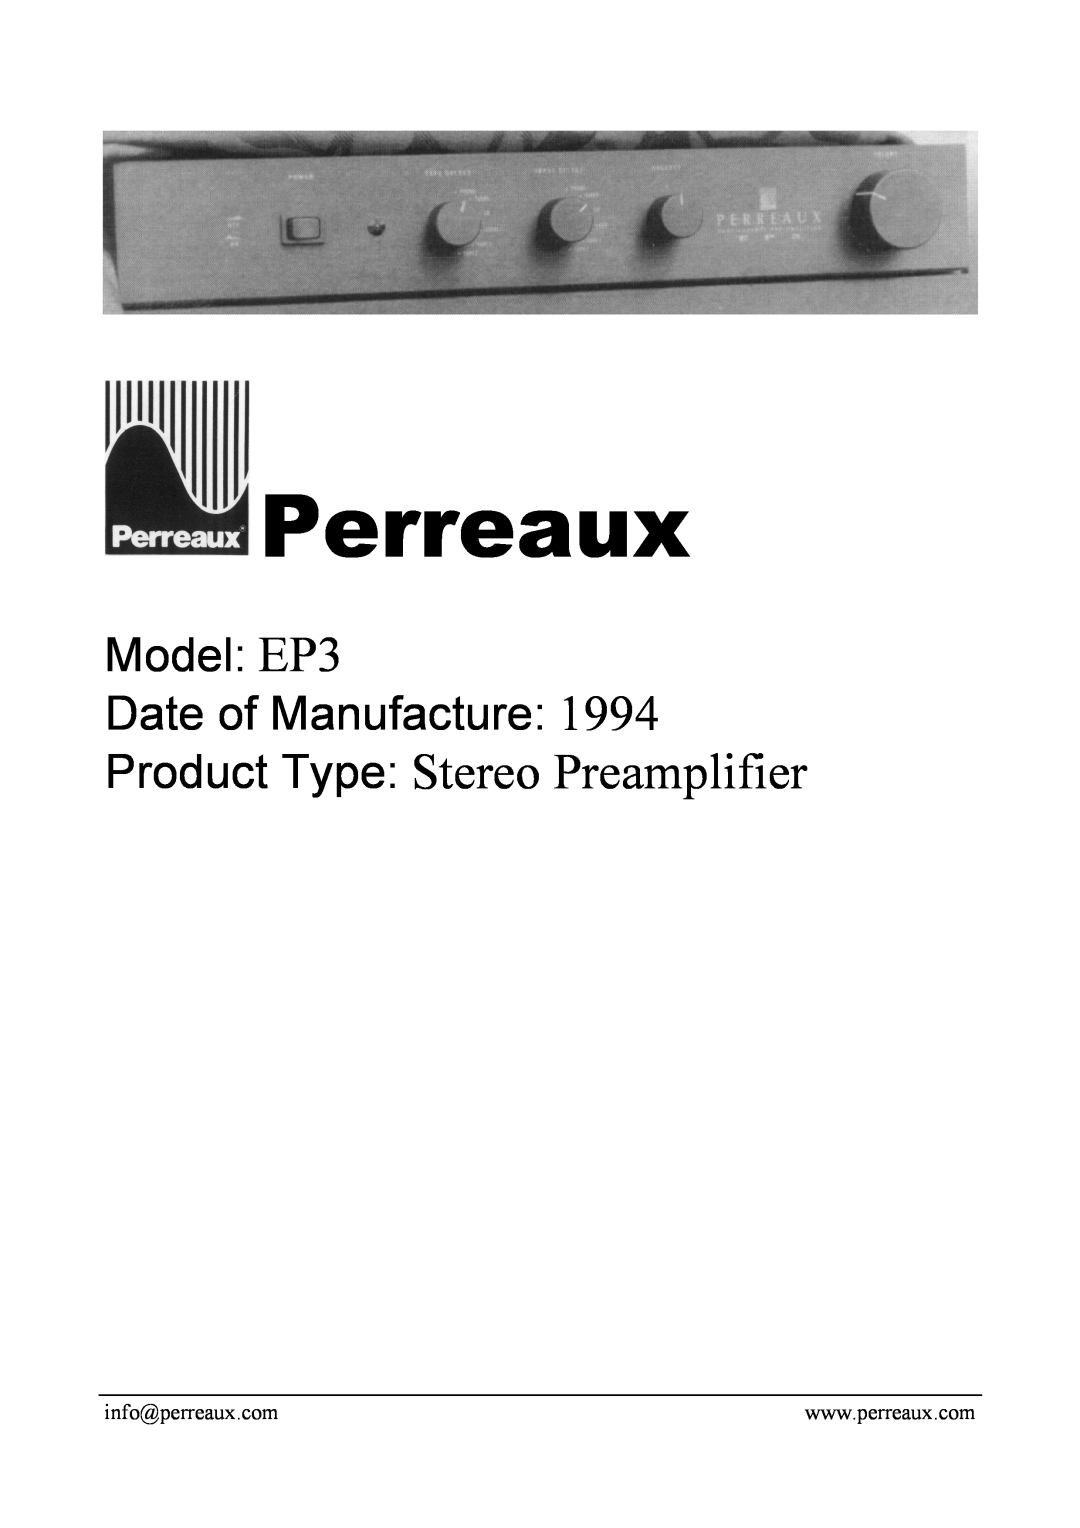 Perreaux manual Perreaux, Product Type Stereo Preamplifier, Model EP3 Date of Manufacture 